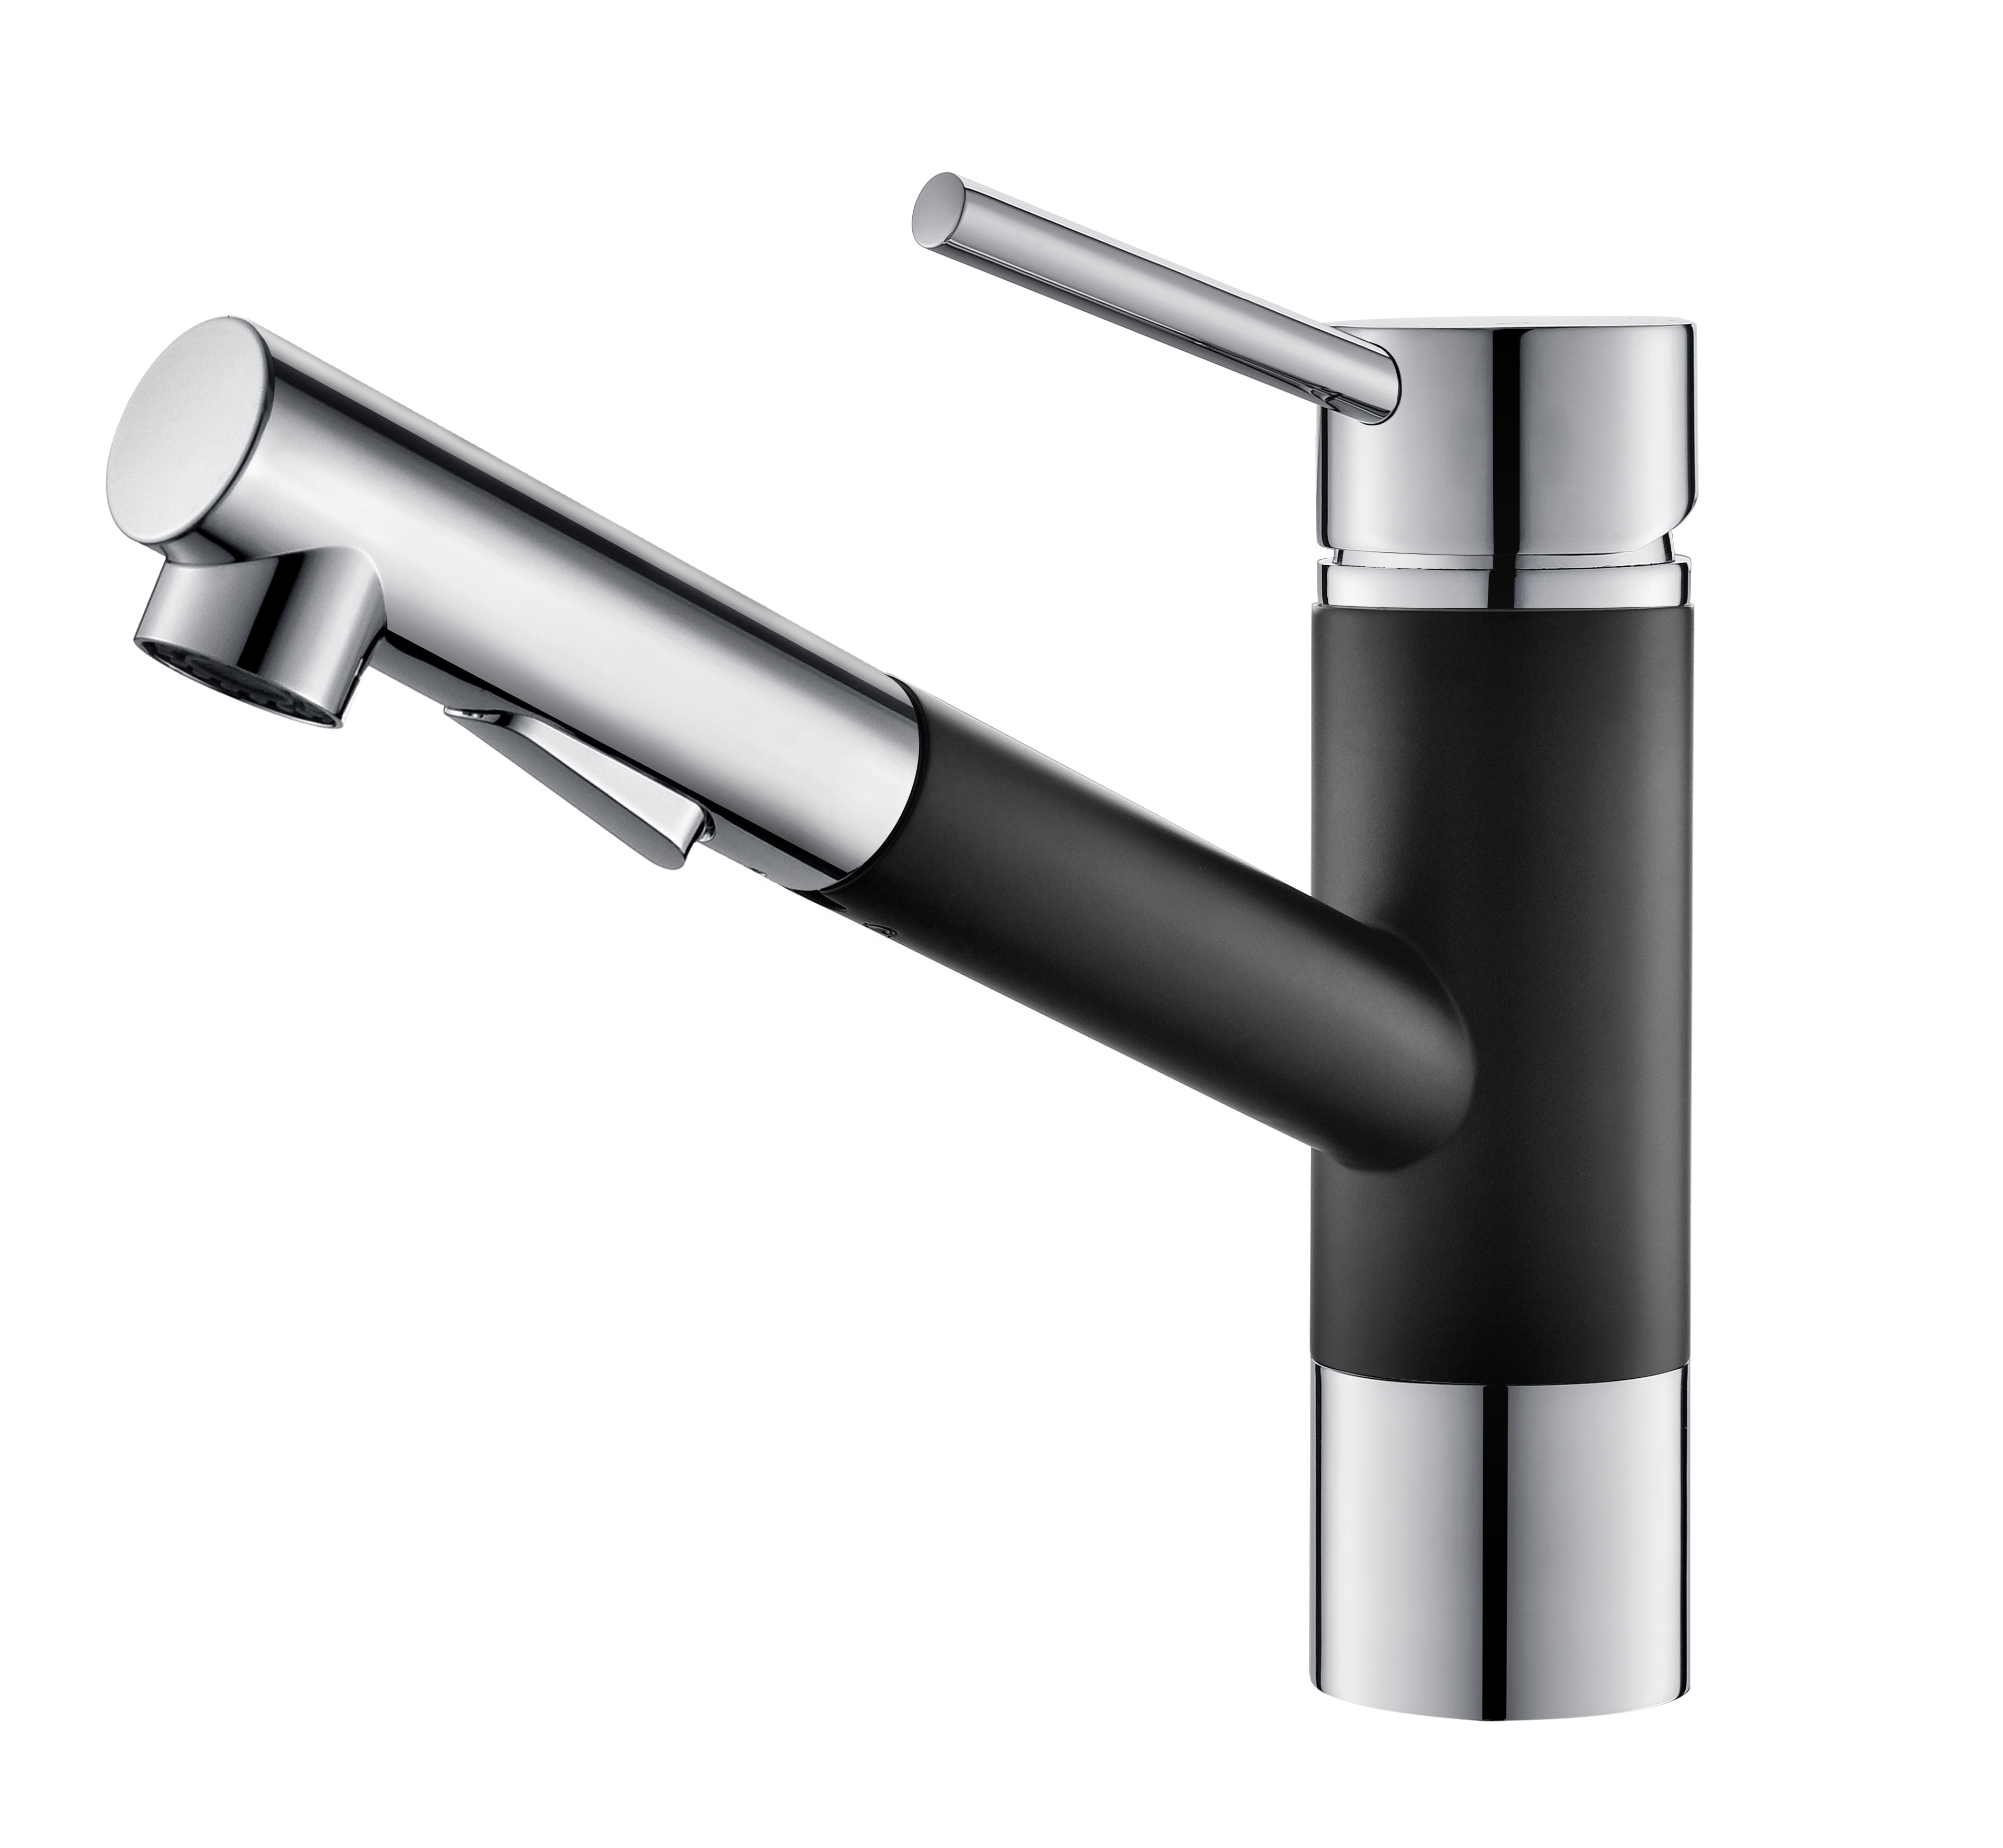 Contemporary Stainless Steel Pull Out Kitchen Faucets Taps Kitchen Sink Faucets